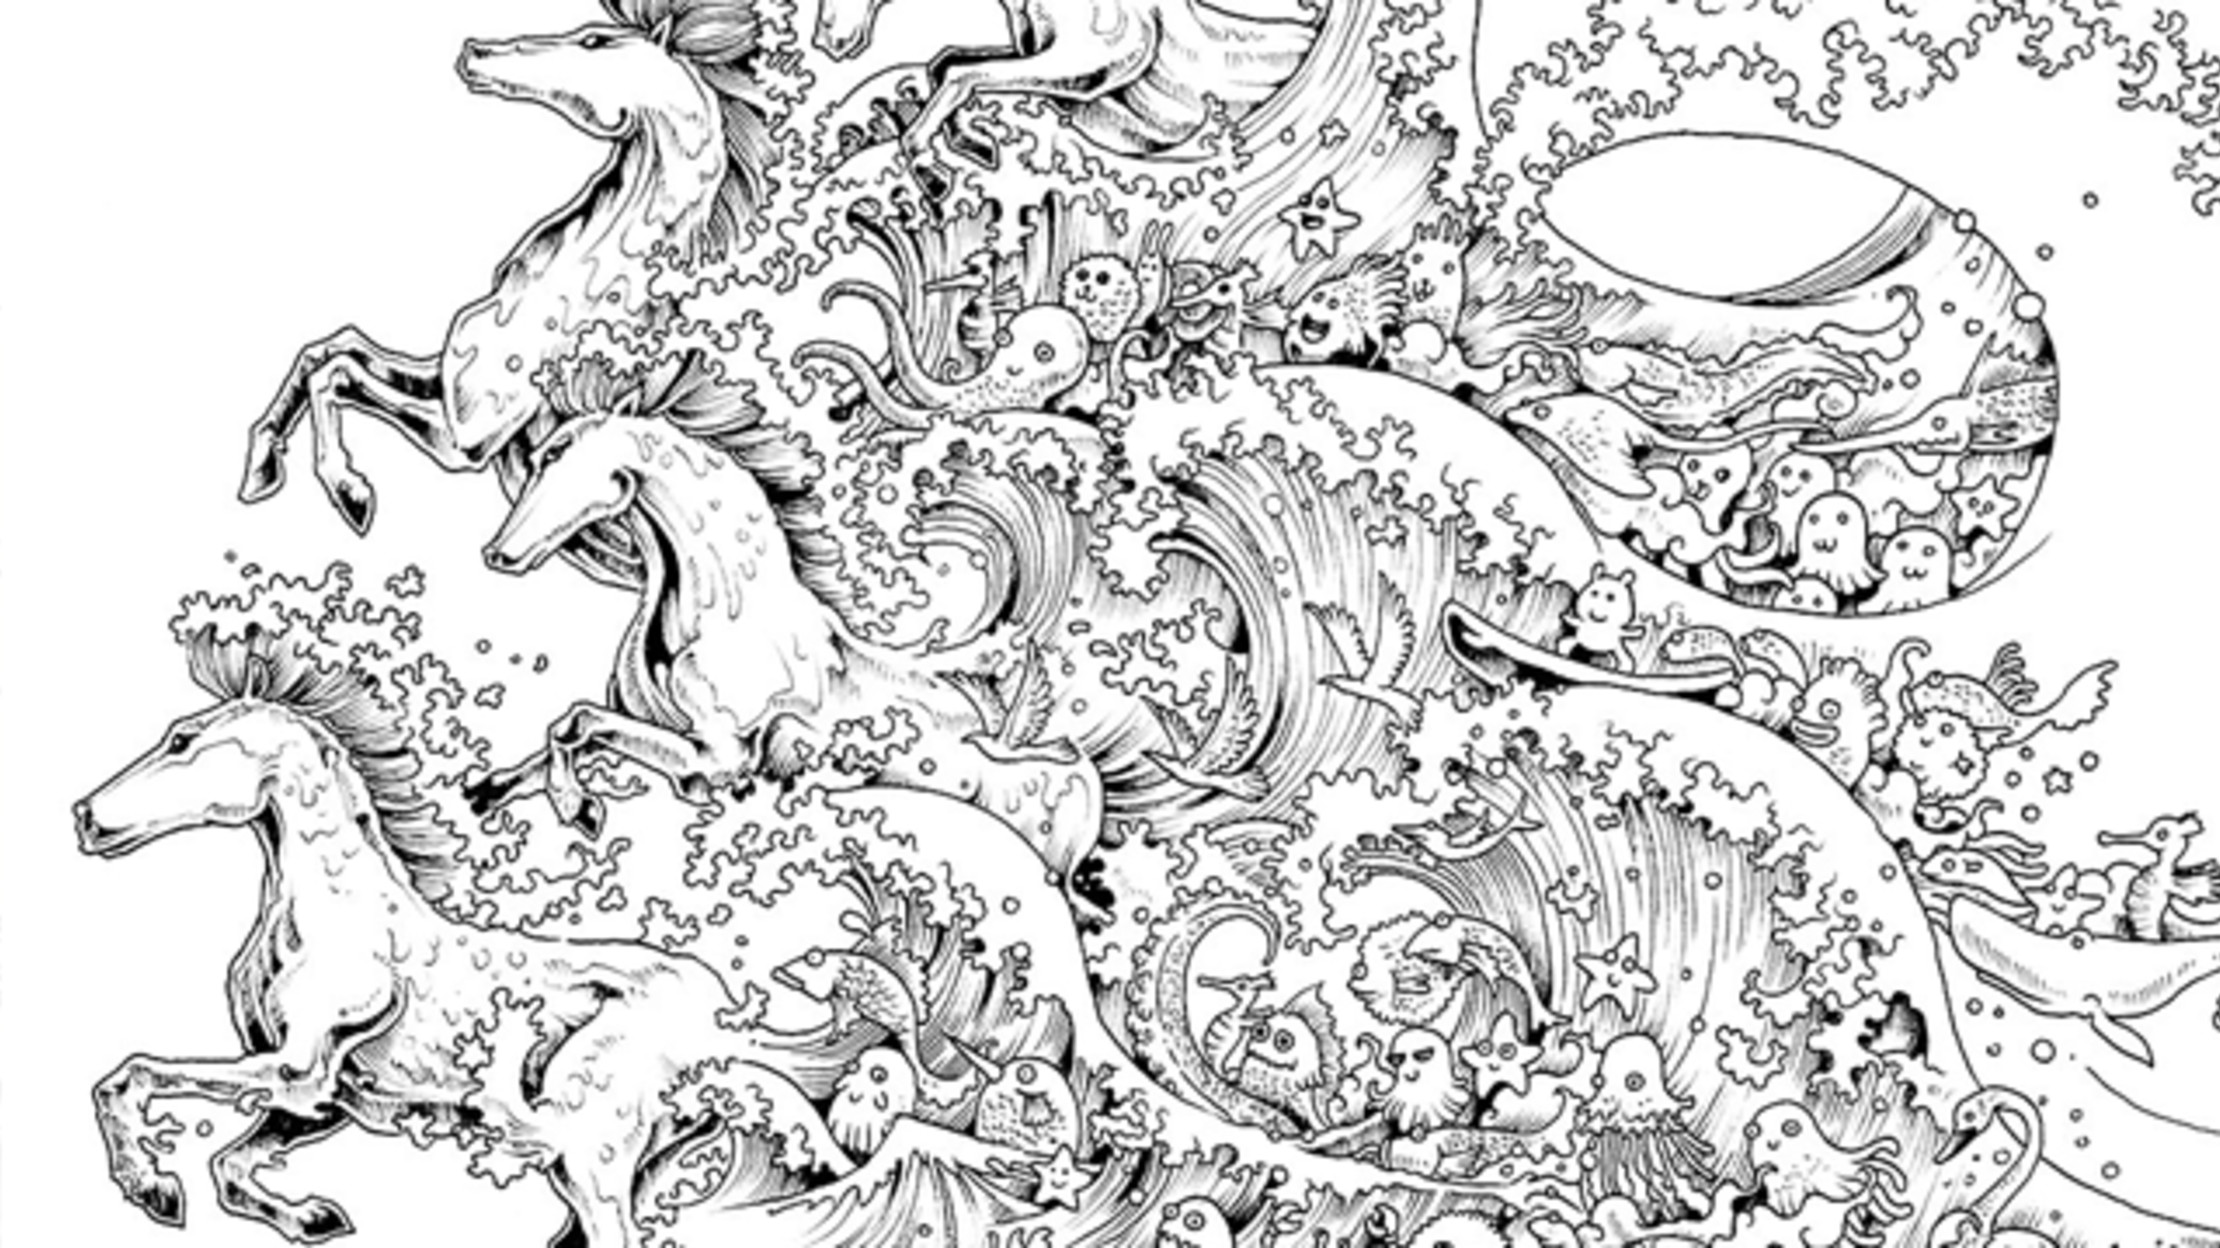 Adult Coloring Book Patterns
 10 Intricate Adult Coloring Books to Help You De Stress